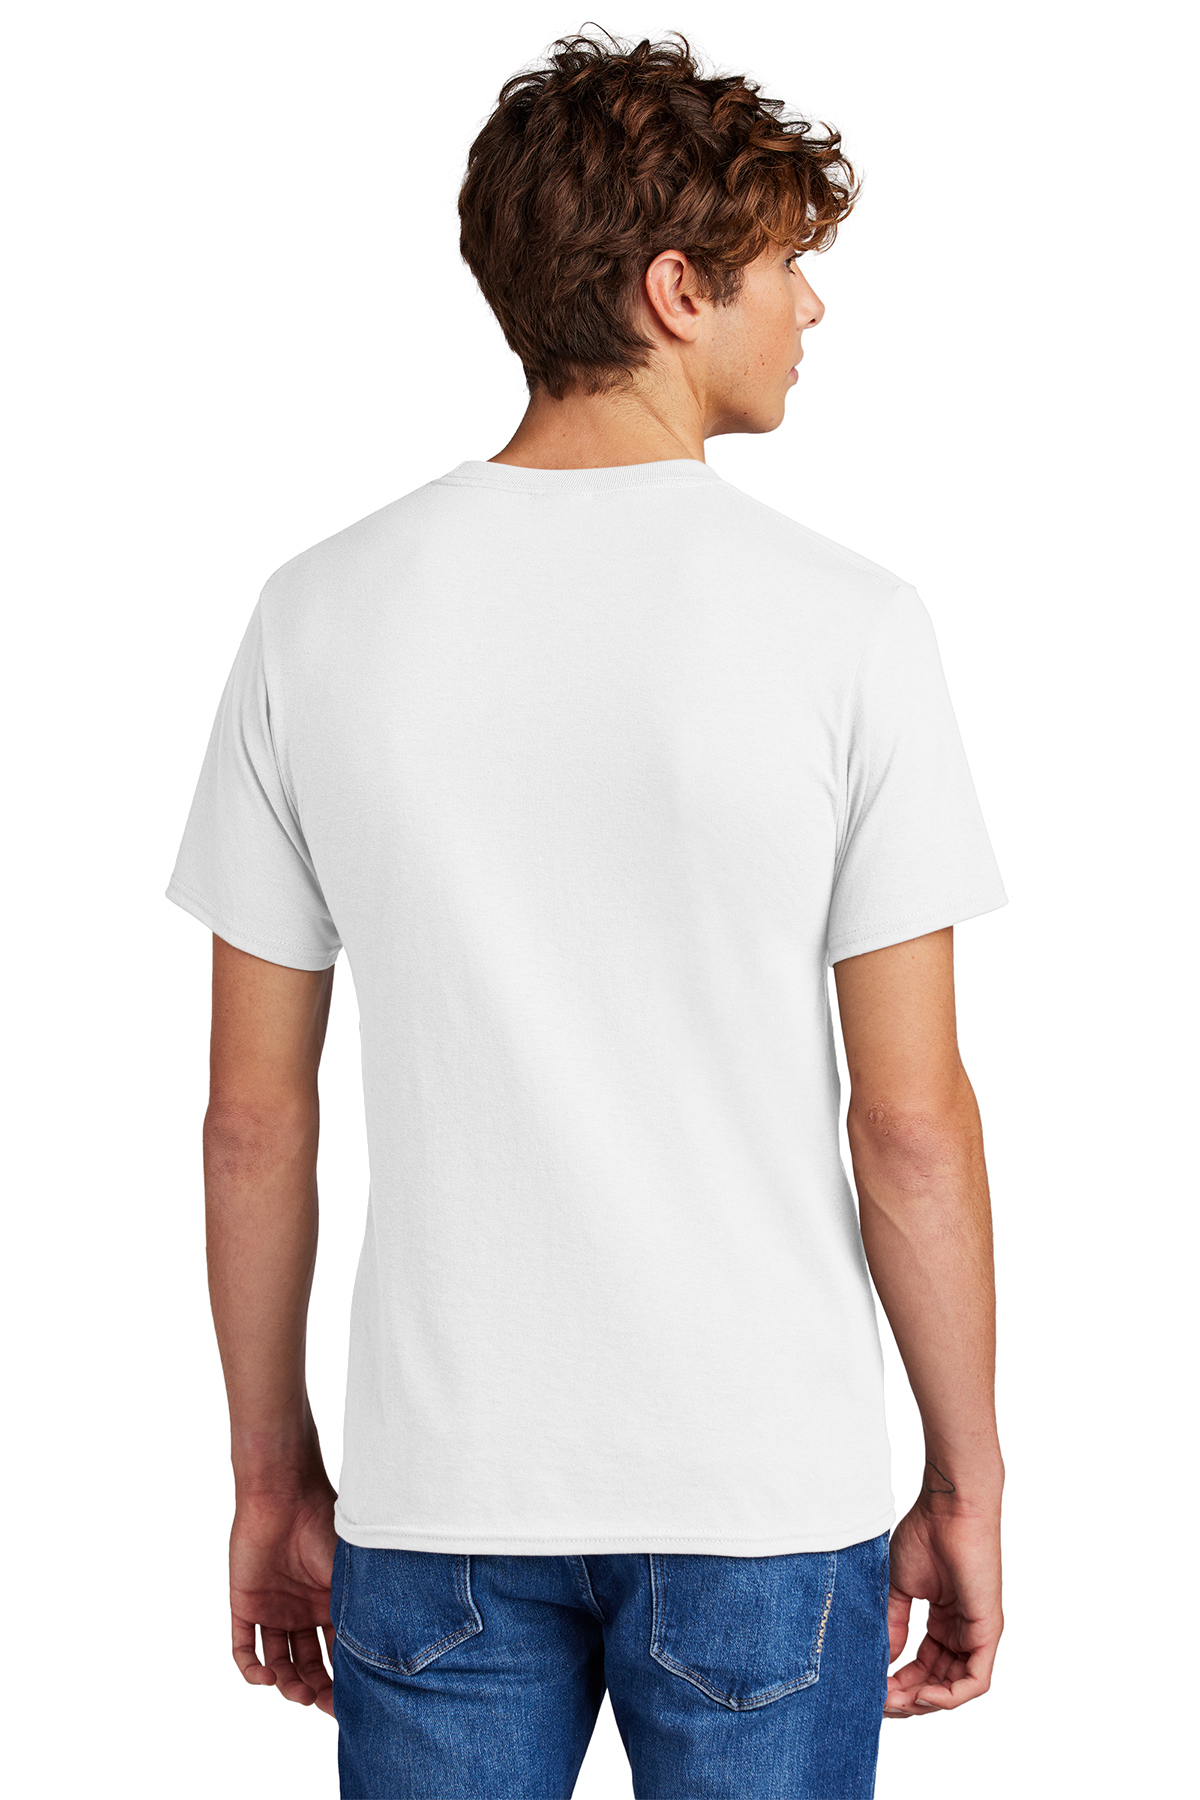 mecilla [***26755] Organic Cotton Unisex T-Shirt – Sustainable Corporate  Apparel and Merchandise